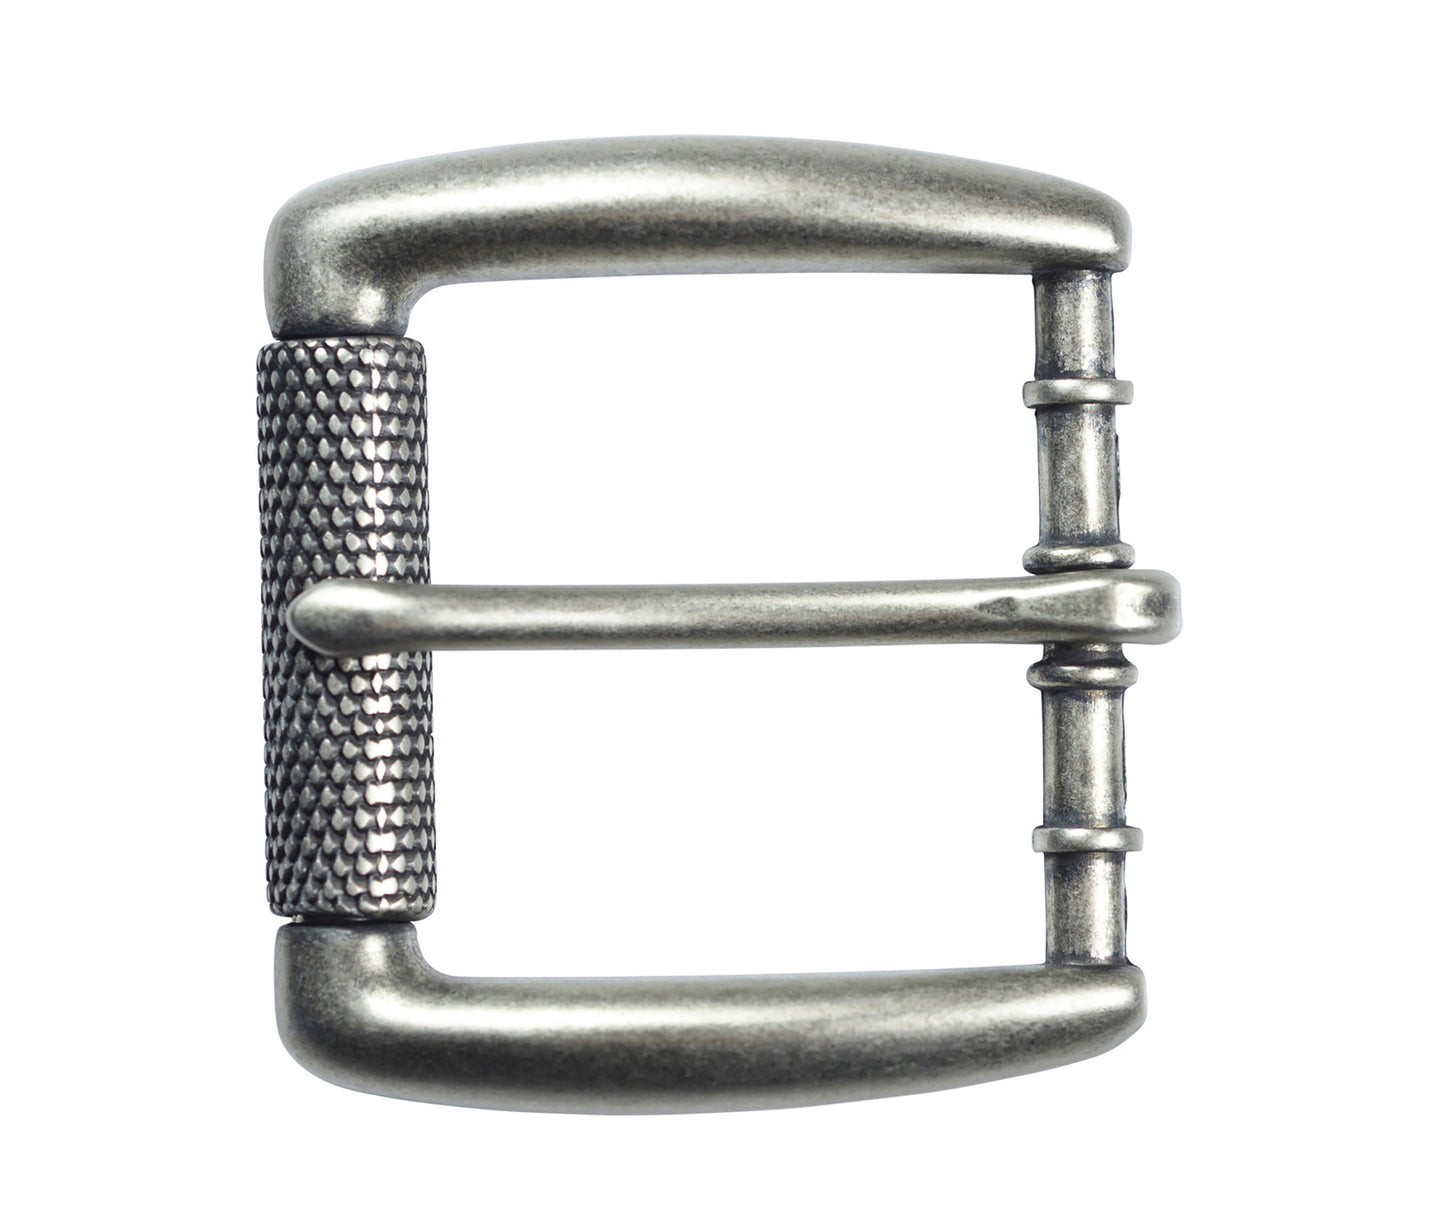 TBS-P4252 - Antique Silver Roller Buckle for 1 1/2" Belts